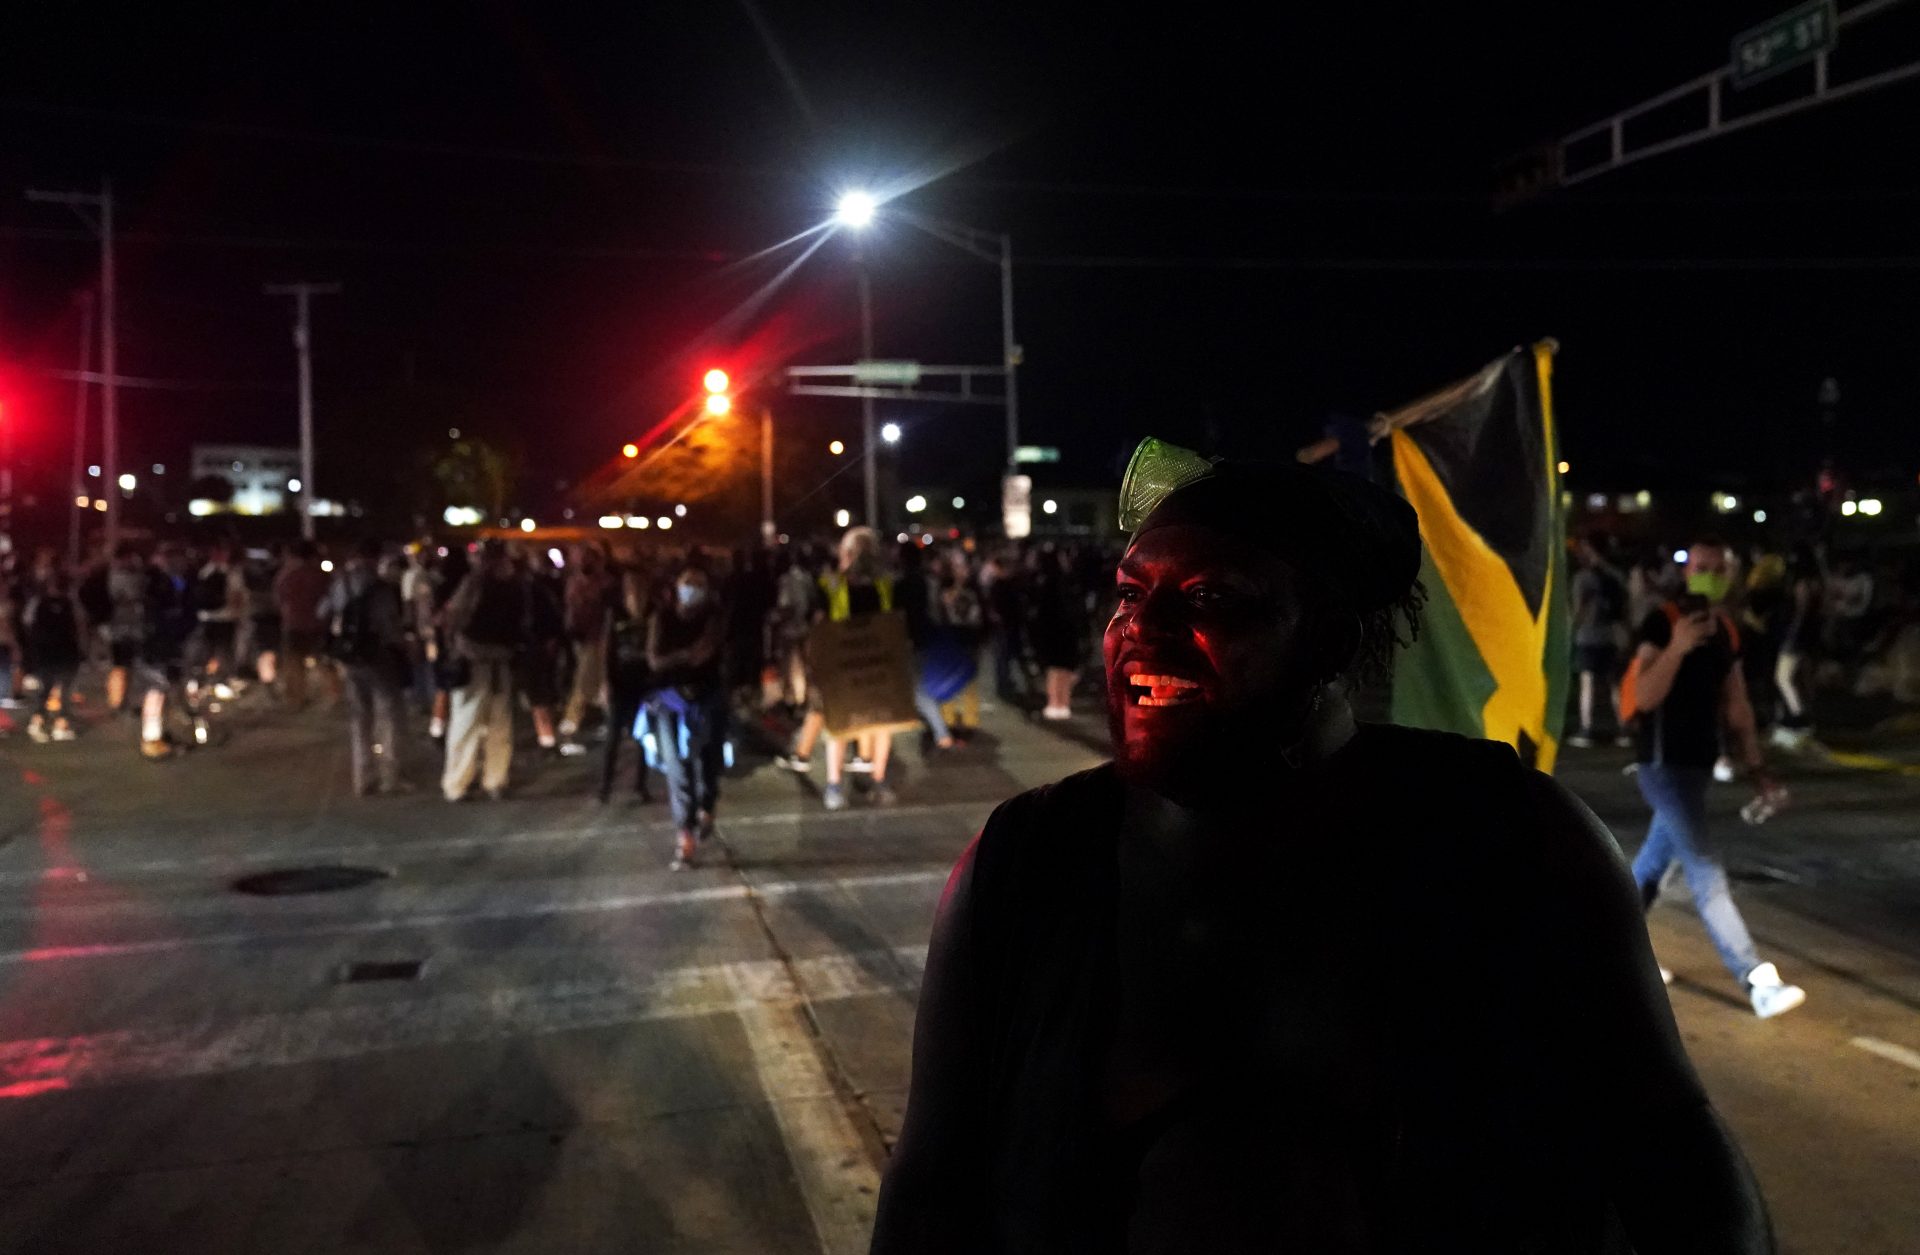 Oscar Walton speaks to fellow protesters while marching against the police shooting of Jacob Blake in Kenosha, Wis., Wednesday, Aug. 26, 2020.